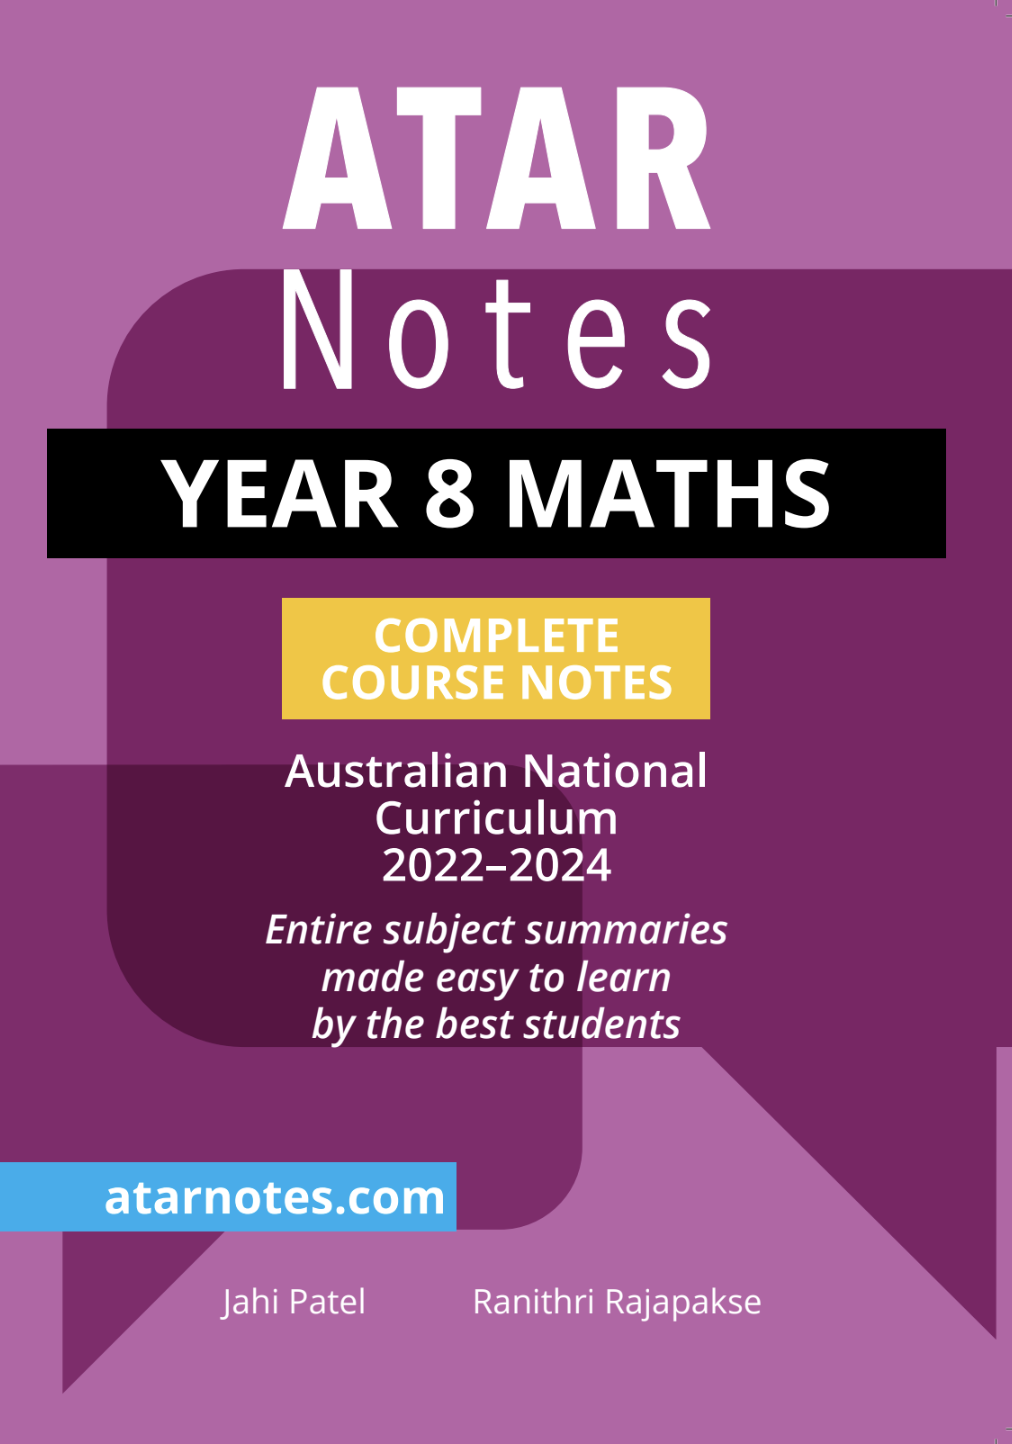 ATAR Notes Year 8 Maths Complete Course Notes (2022-2024)